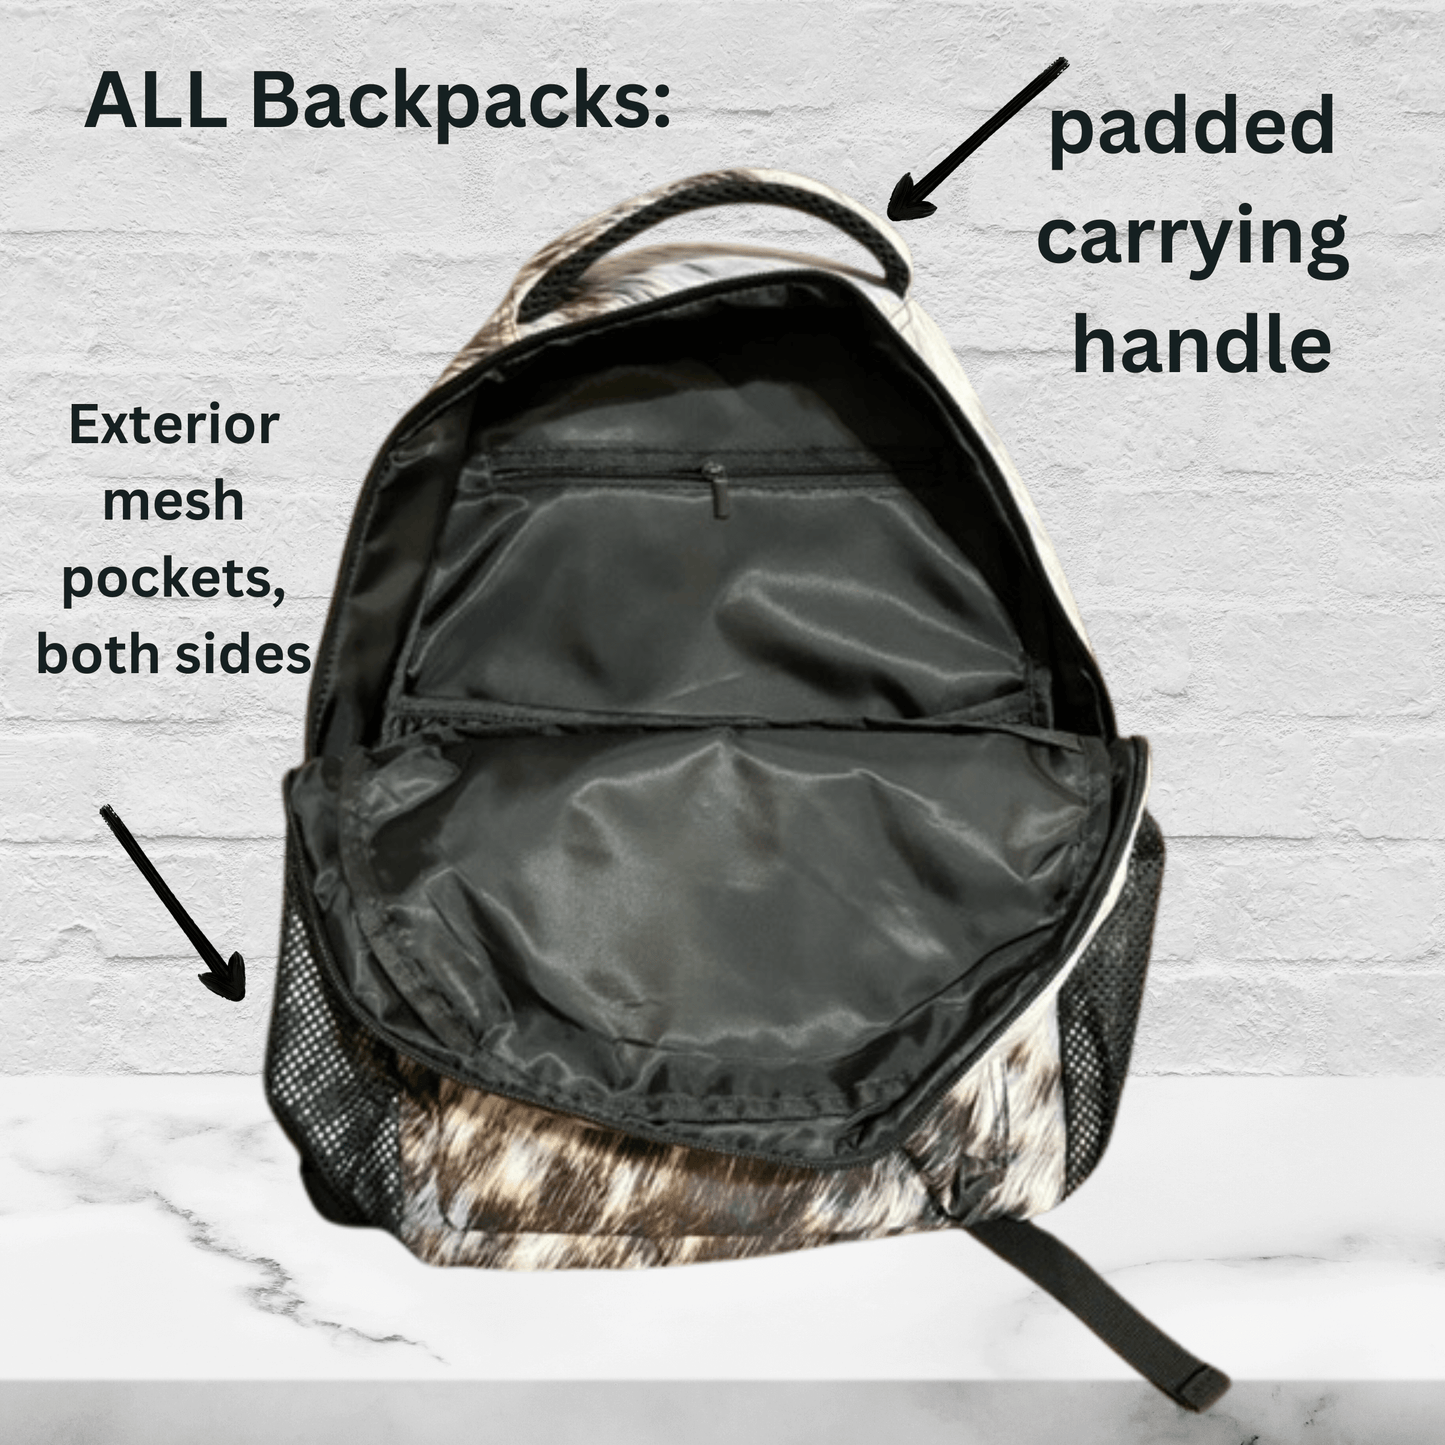 The inside view of our backpack shows a padded top carrying handle and exterior mesh pockets on both sides.